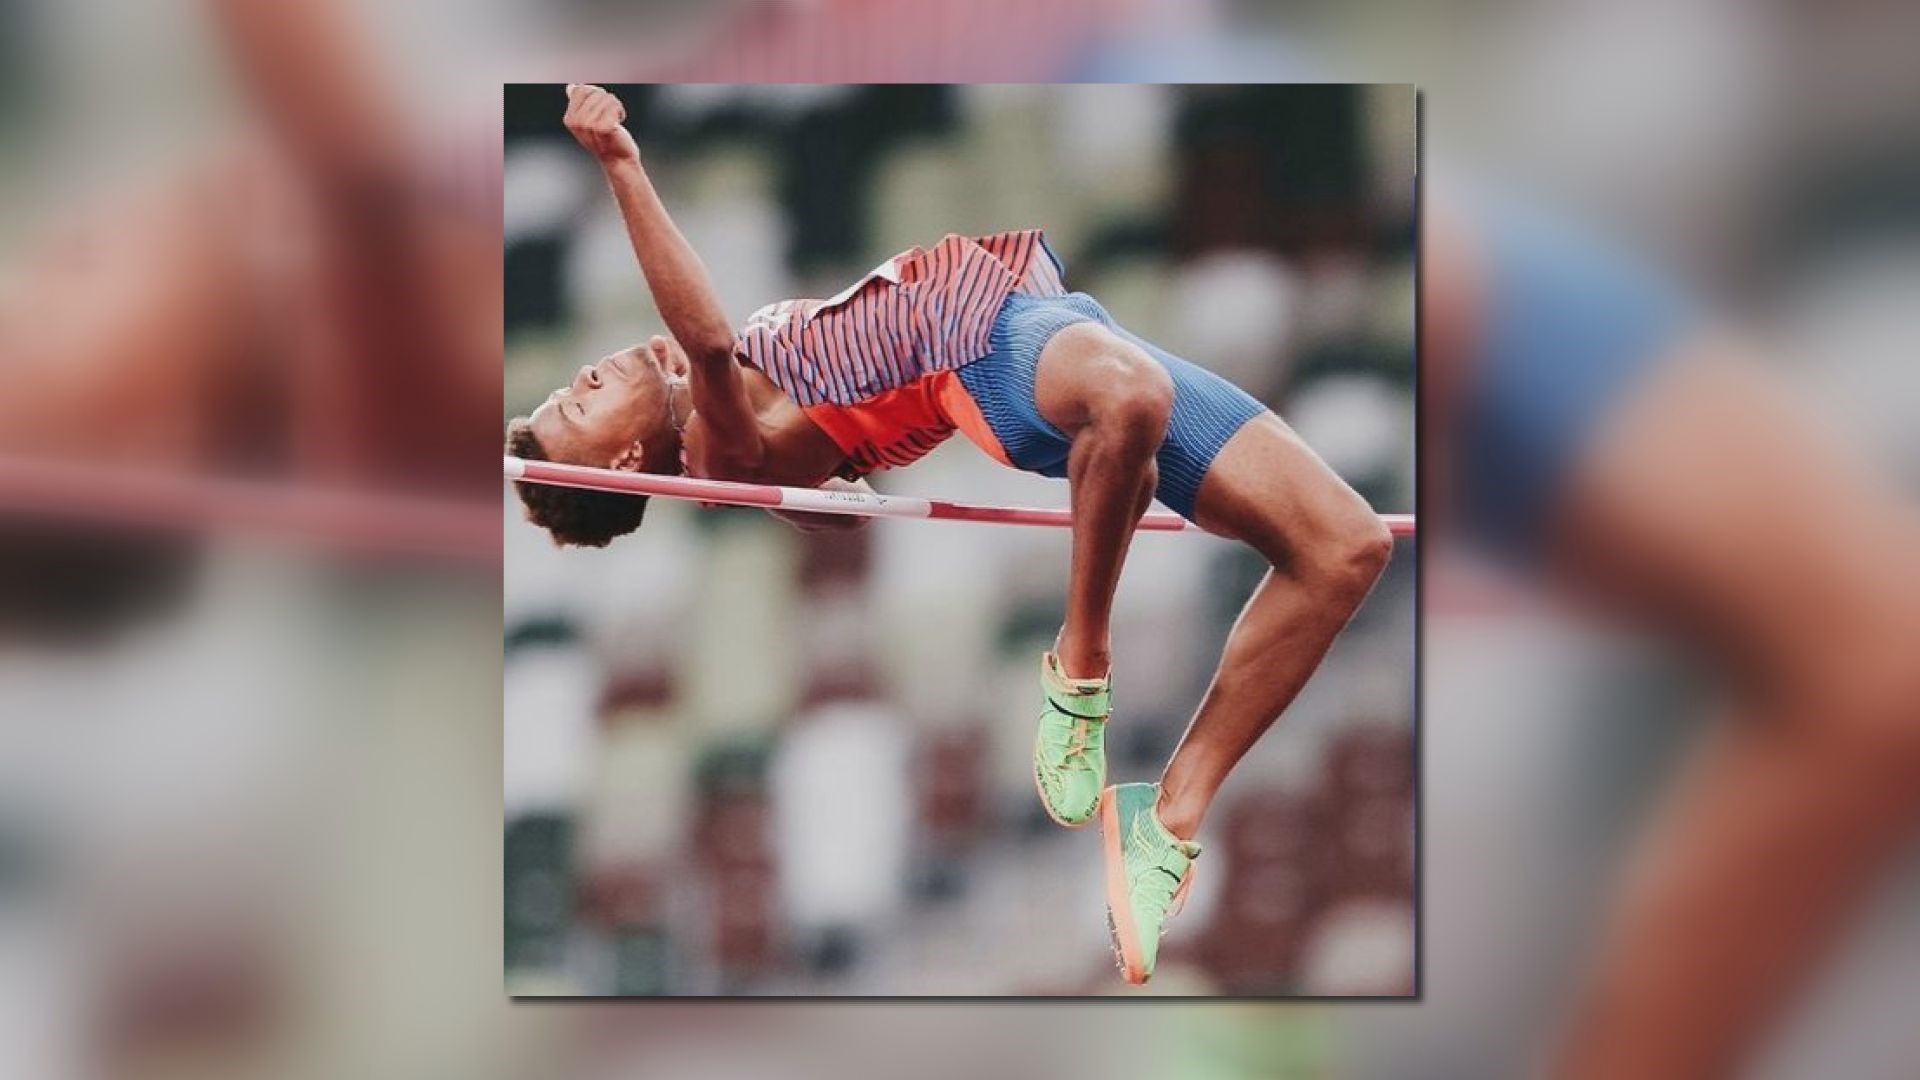 The Dutch Fork Grad earned the first medal of his Paralympic career Sunday as he won Silver in the men’s T47 high jump event at the 2020 Tokyo Paralympic Games.